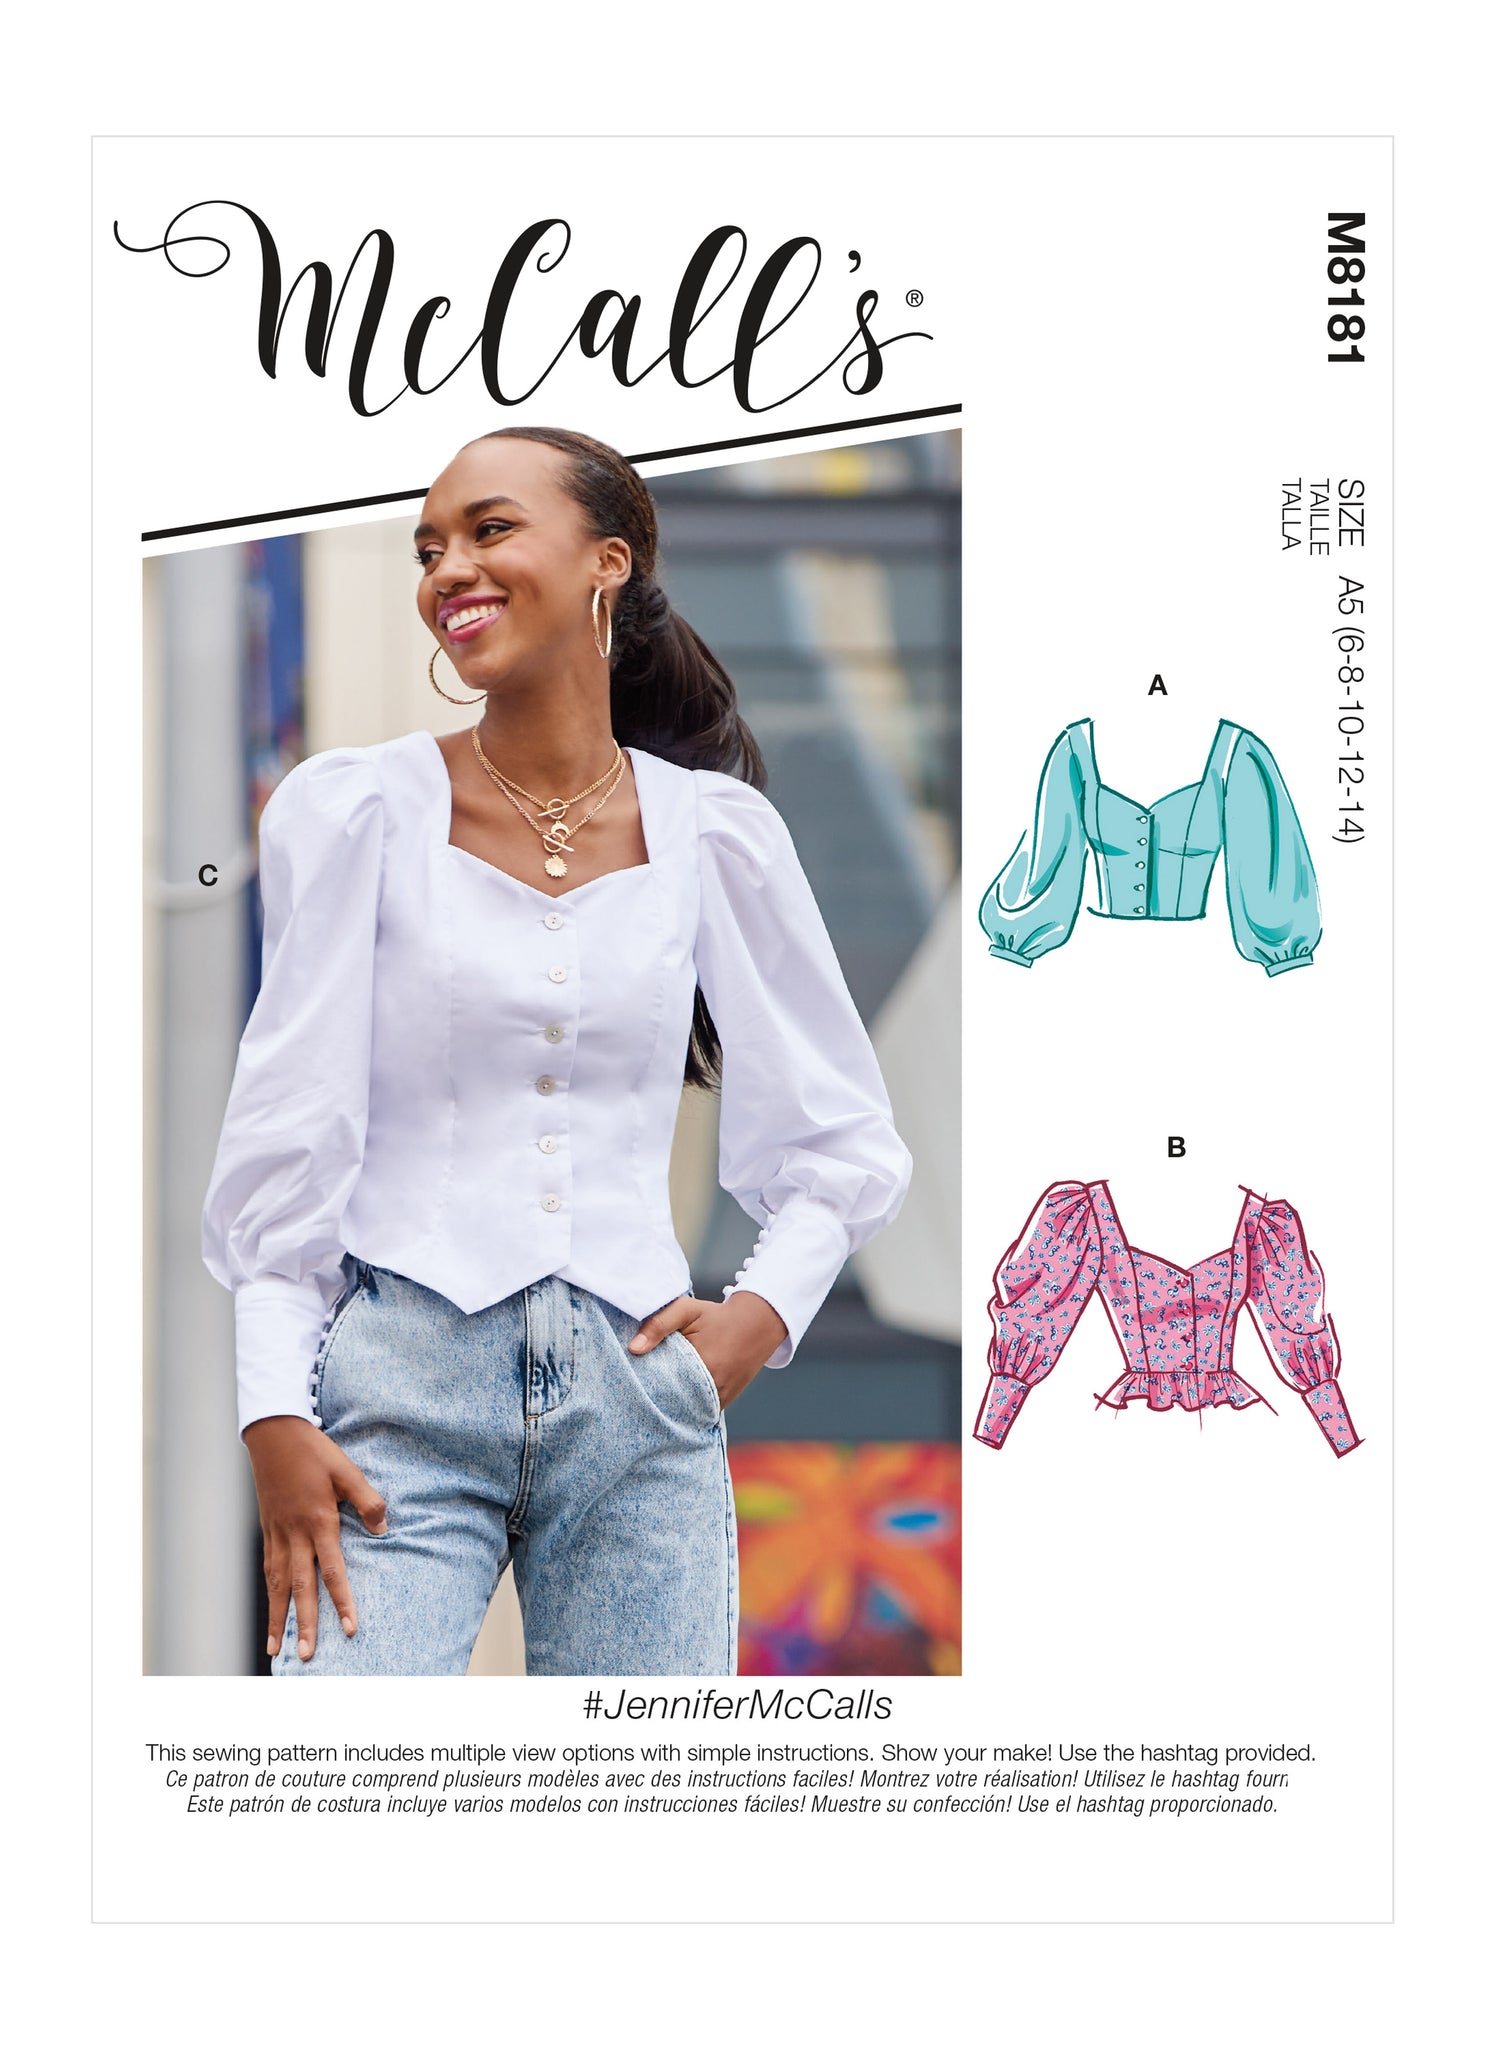 McCall's Sewing Pattern M8255 - Misses' and Women's Tops, Size:  KK(26W-28W-30W-32W) 